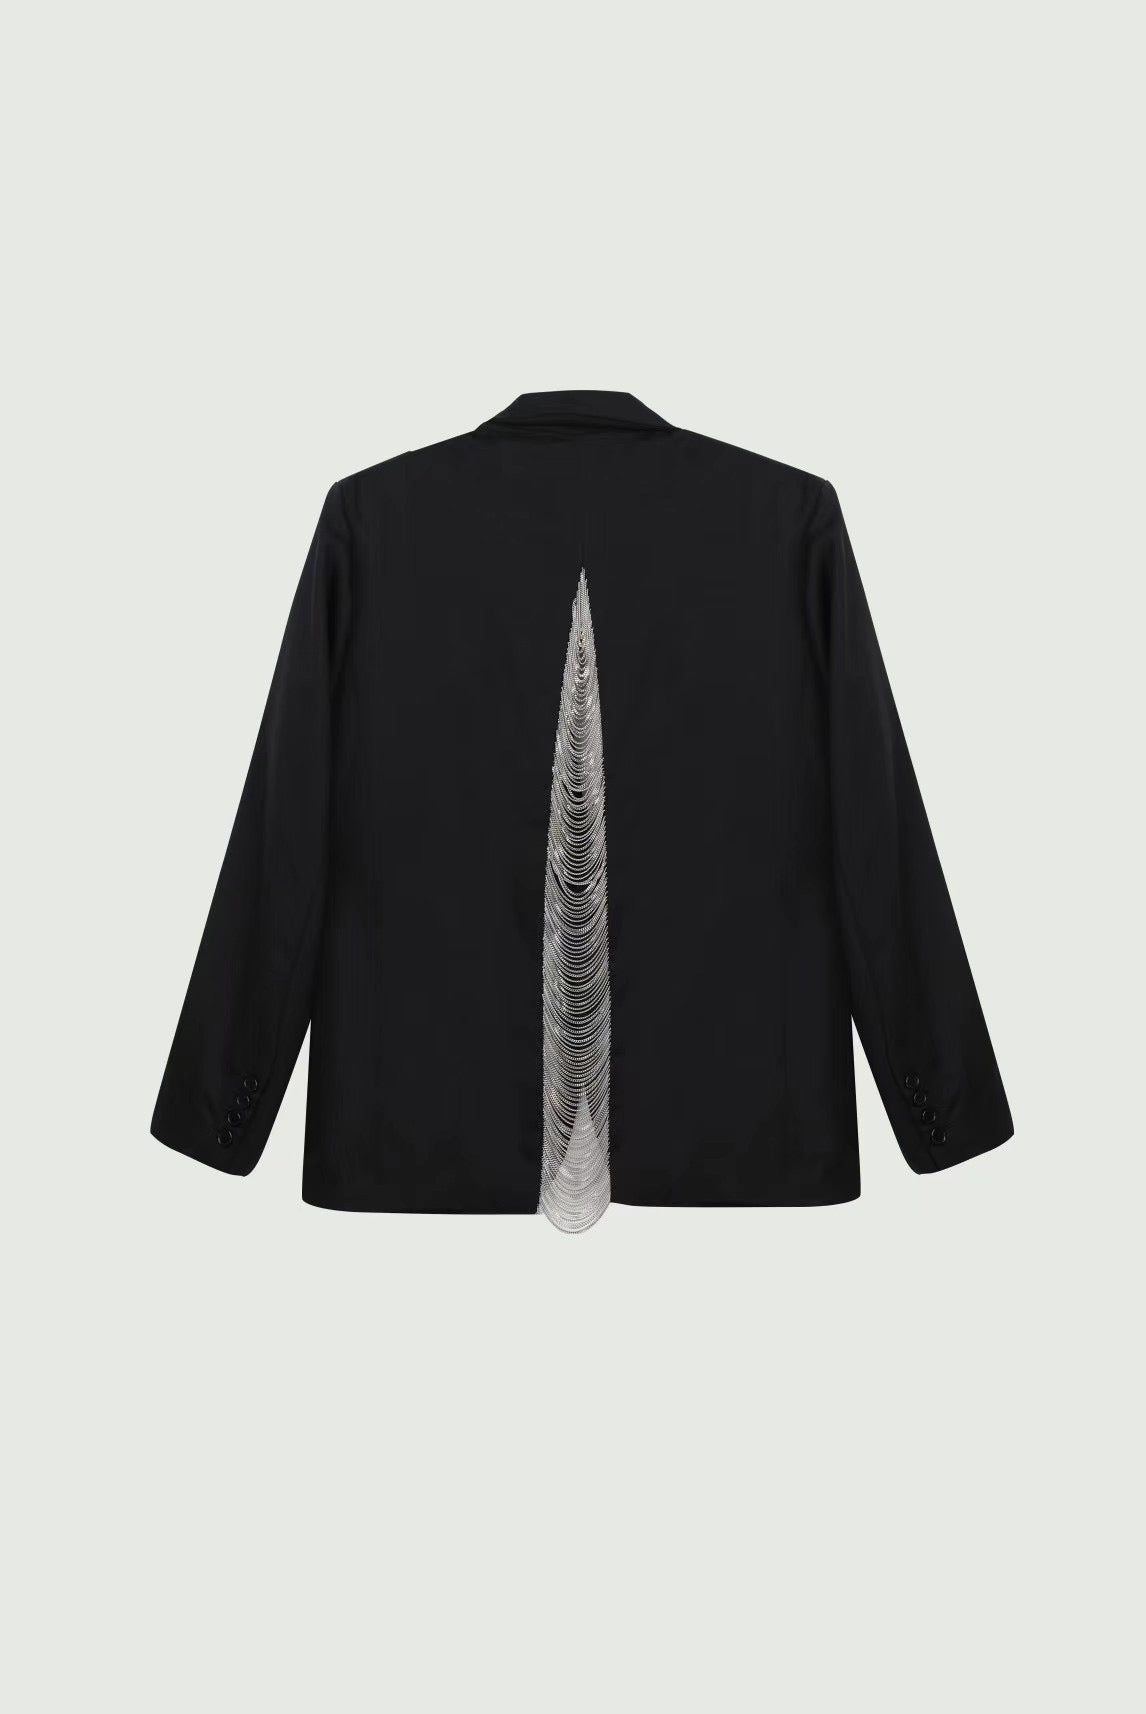 Black Chain Back Suit Jacket, Same as Sha Yiting's Style